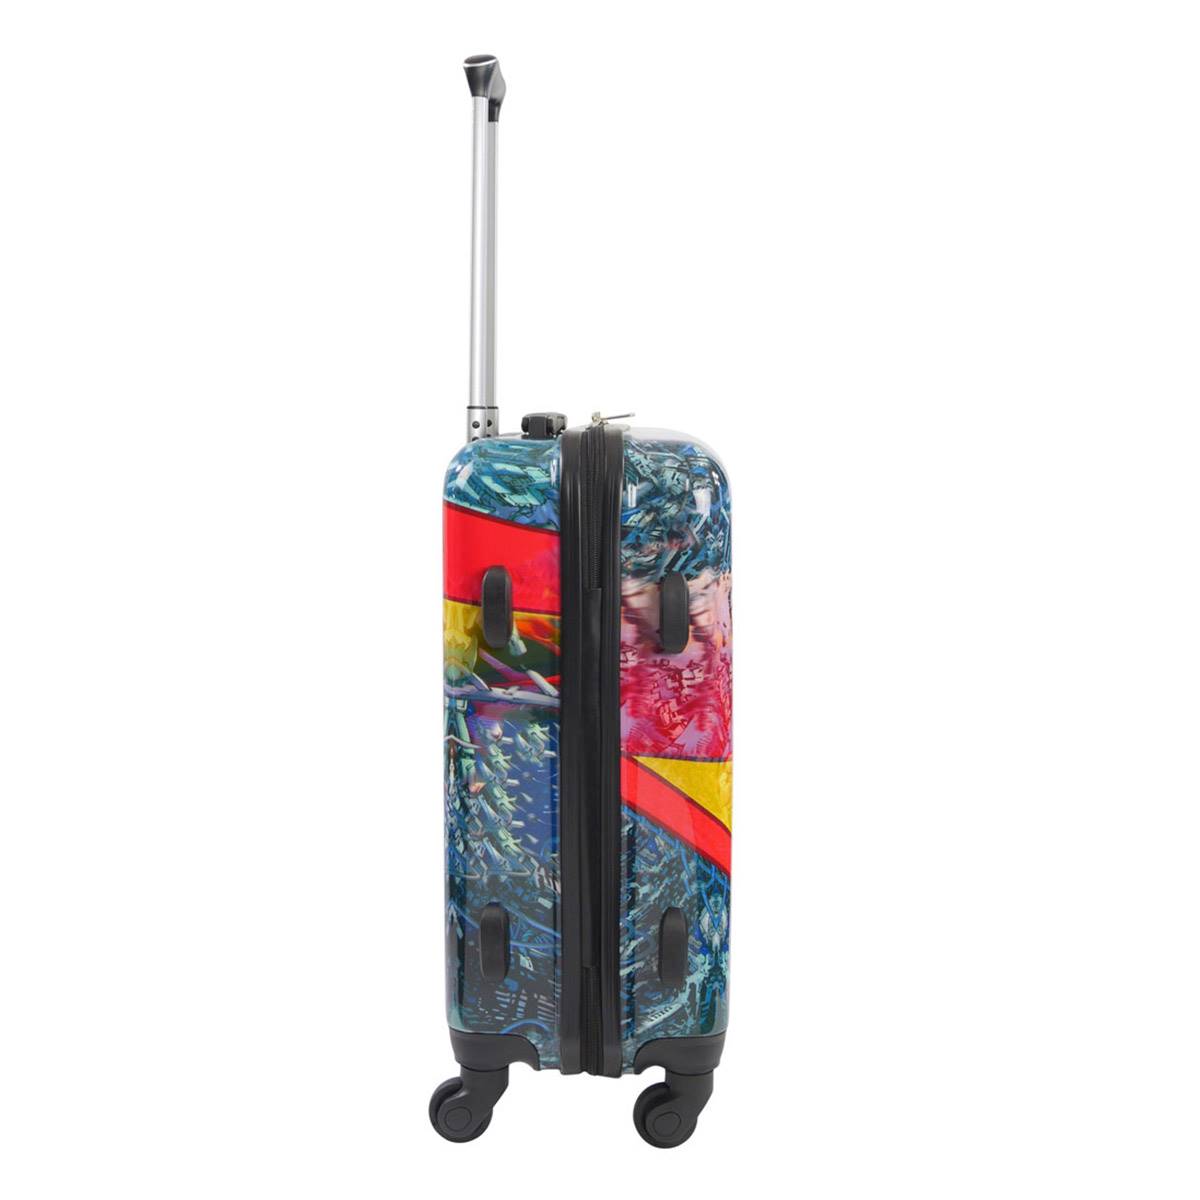 FUL DC Comics 21in. Superman(tm) Hardside Carry-On Spinner Luggage